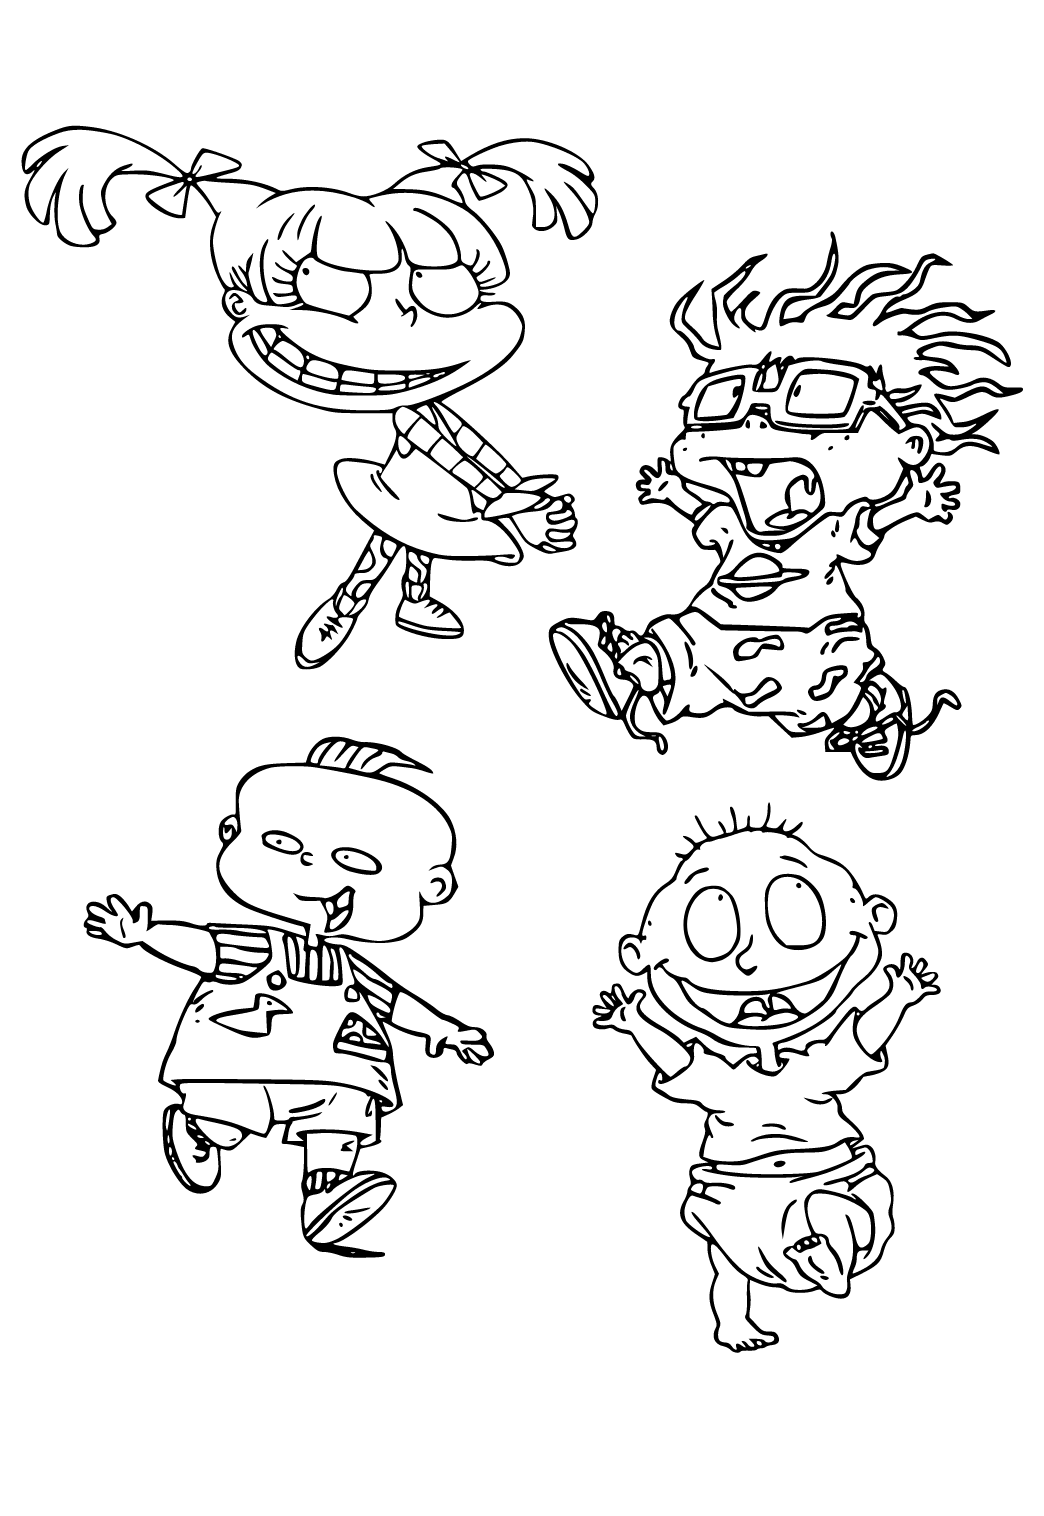 Free printable rugrats friends coloring page for adults and kids